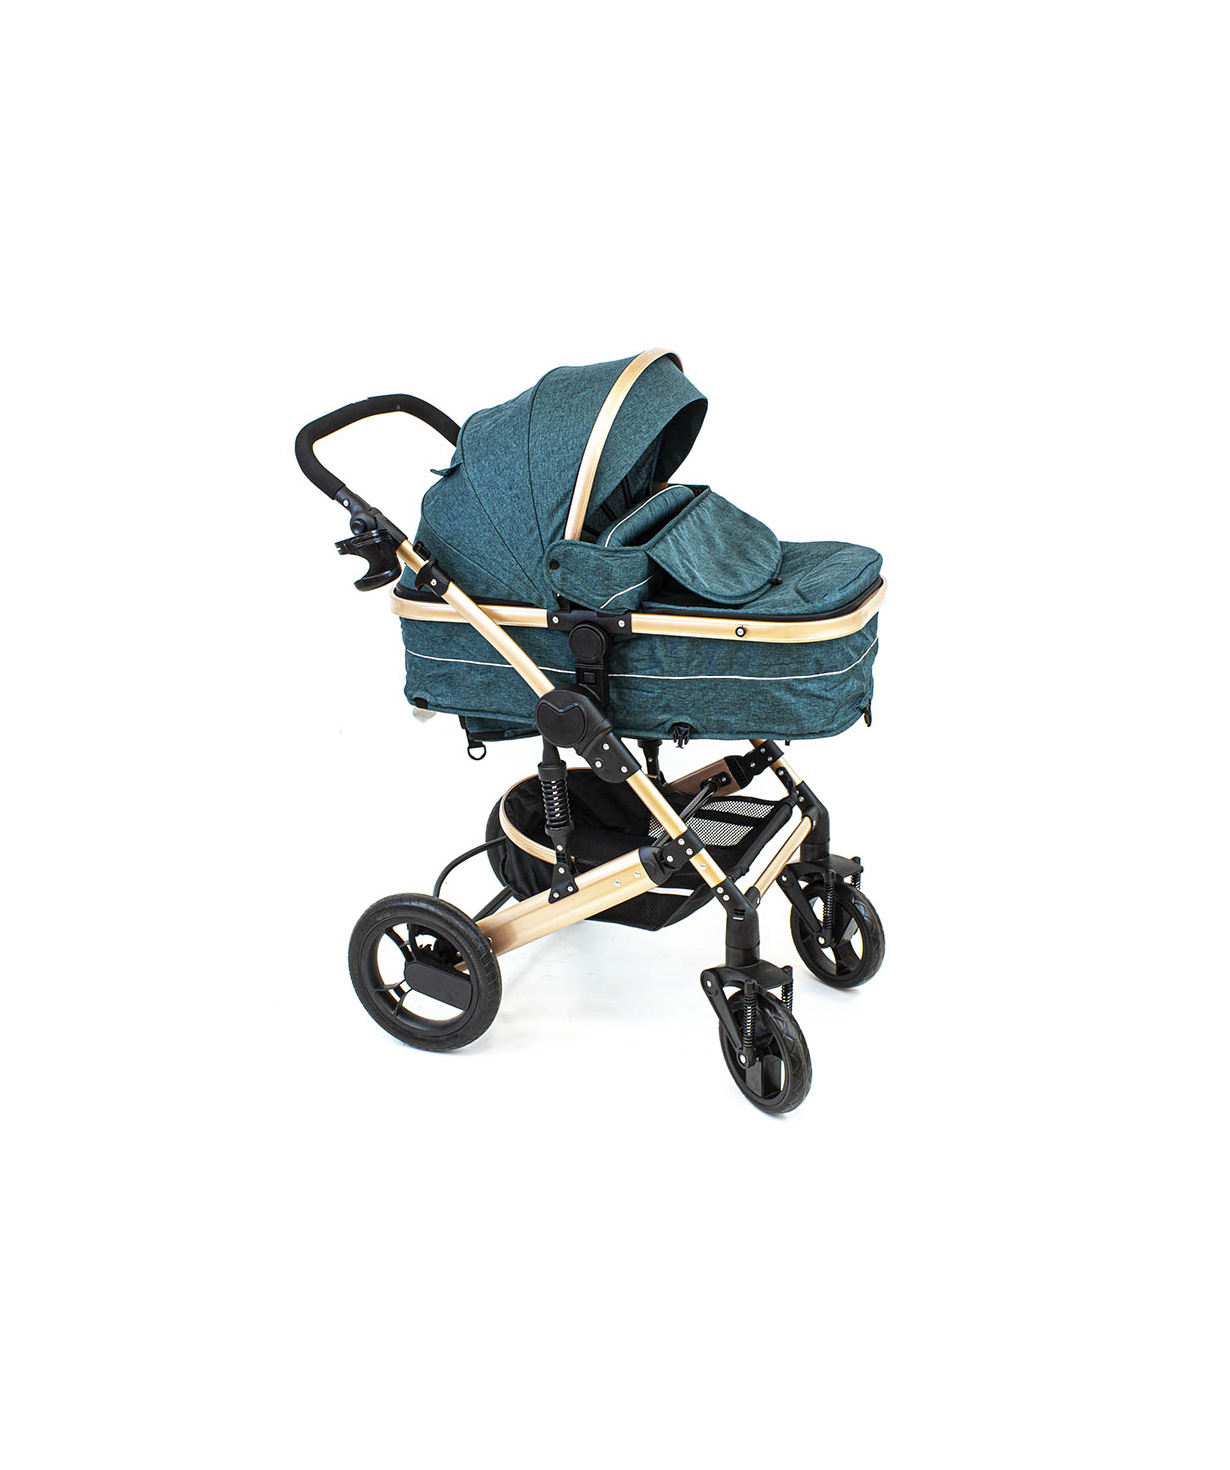 Baby carriage 588+C